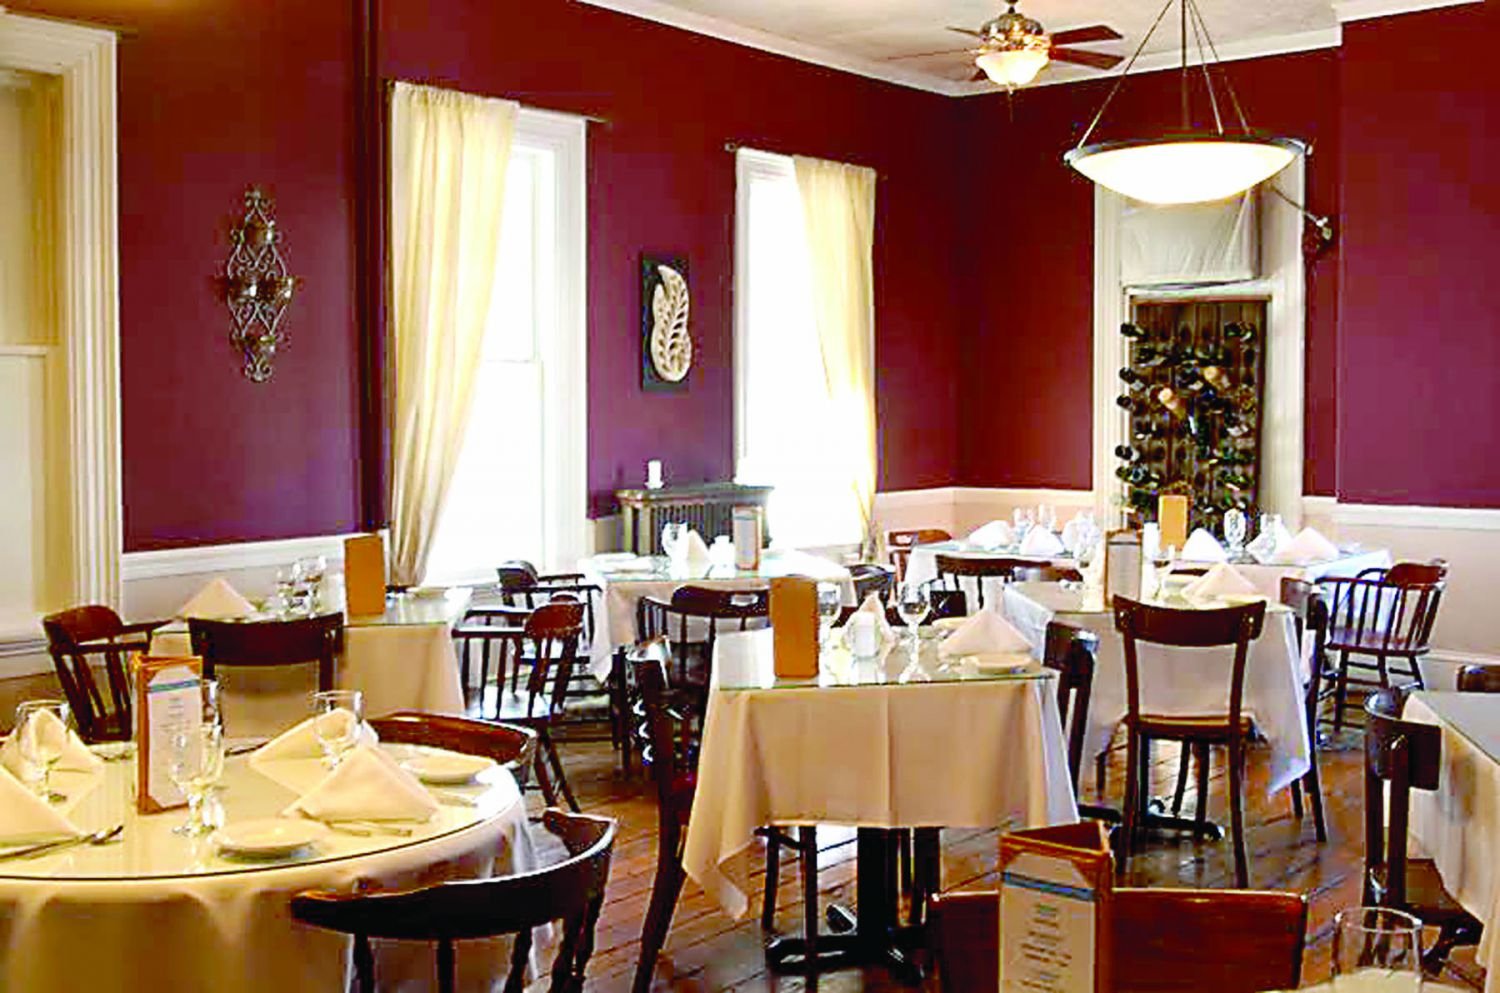 Romance has bloomed in the restaurant dining room of the historic National Hotel in Frenchtown, N.J. Photograph courtesty of National Hotel.